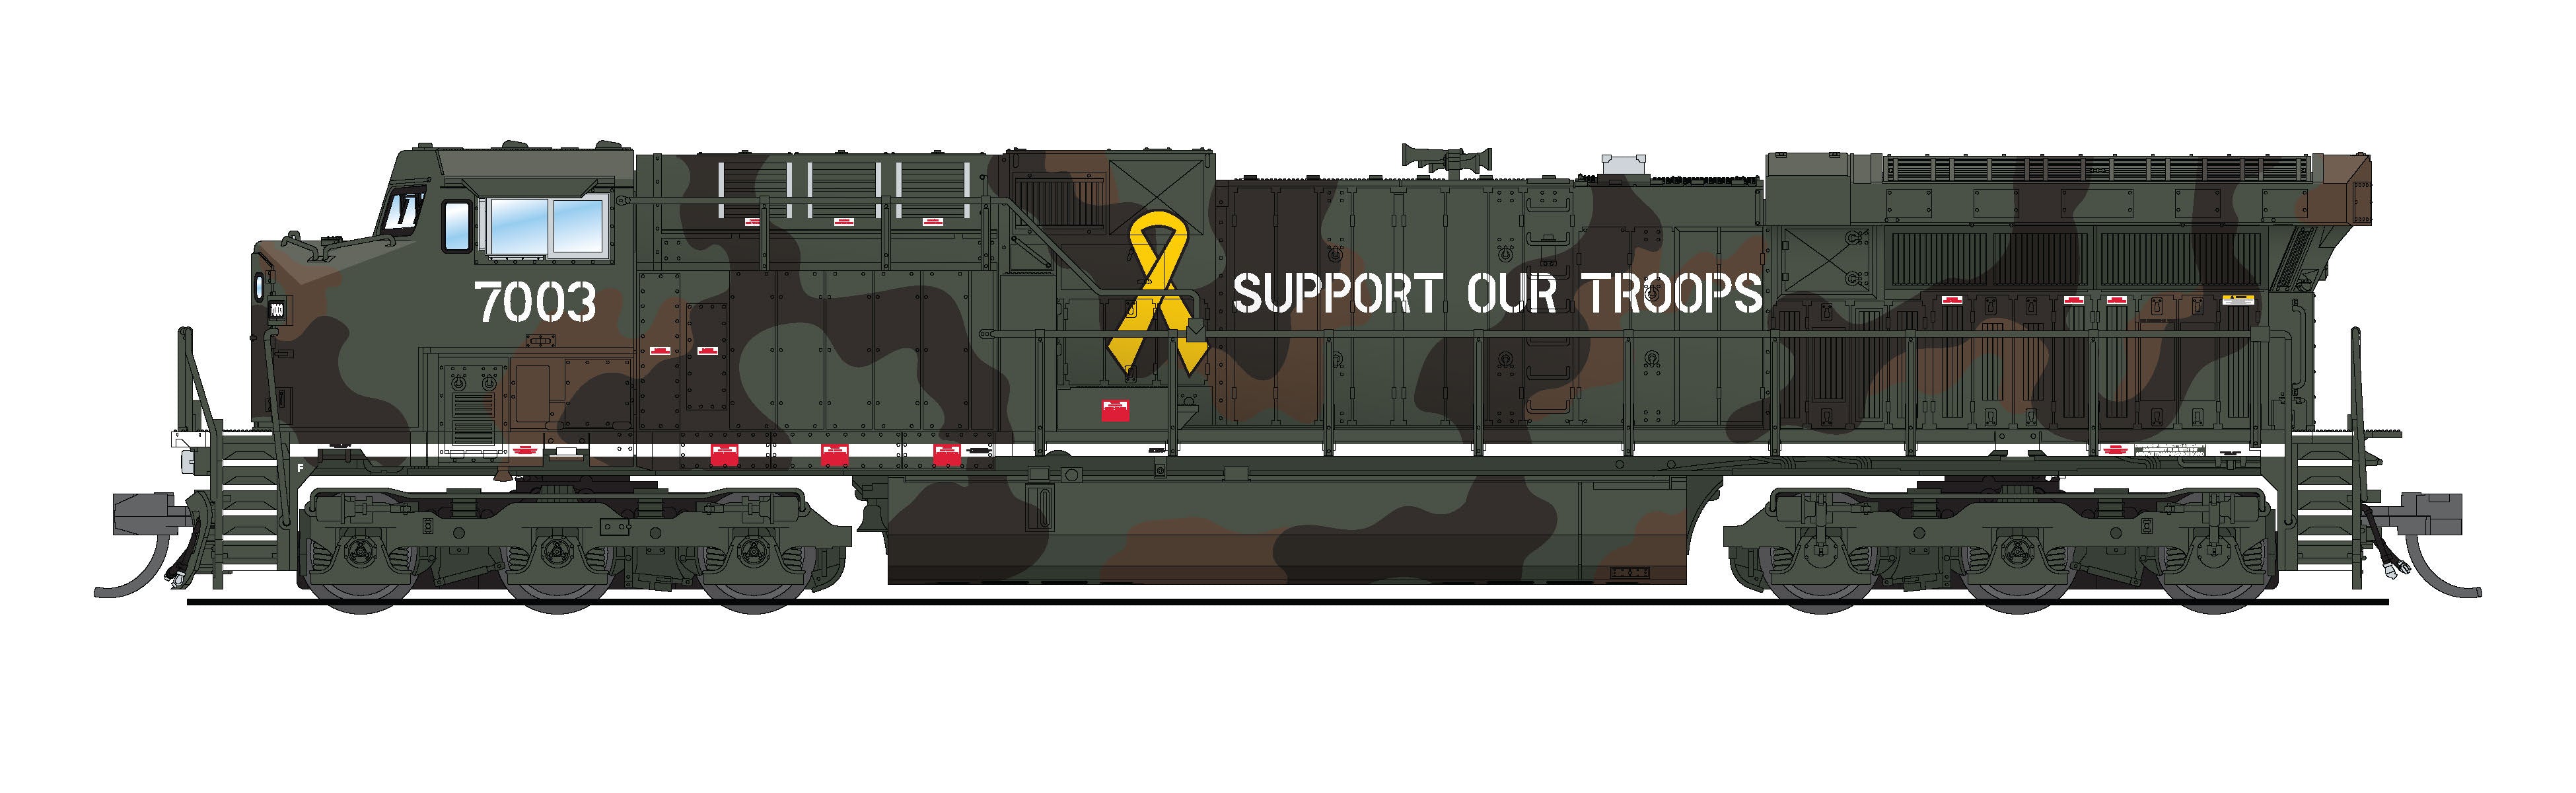 8605 GE AC6000, "Support Our Troops" Fantasy Paint, No-Sound / DCC-Ready, N